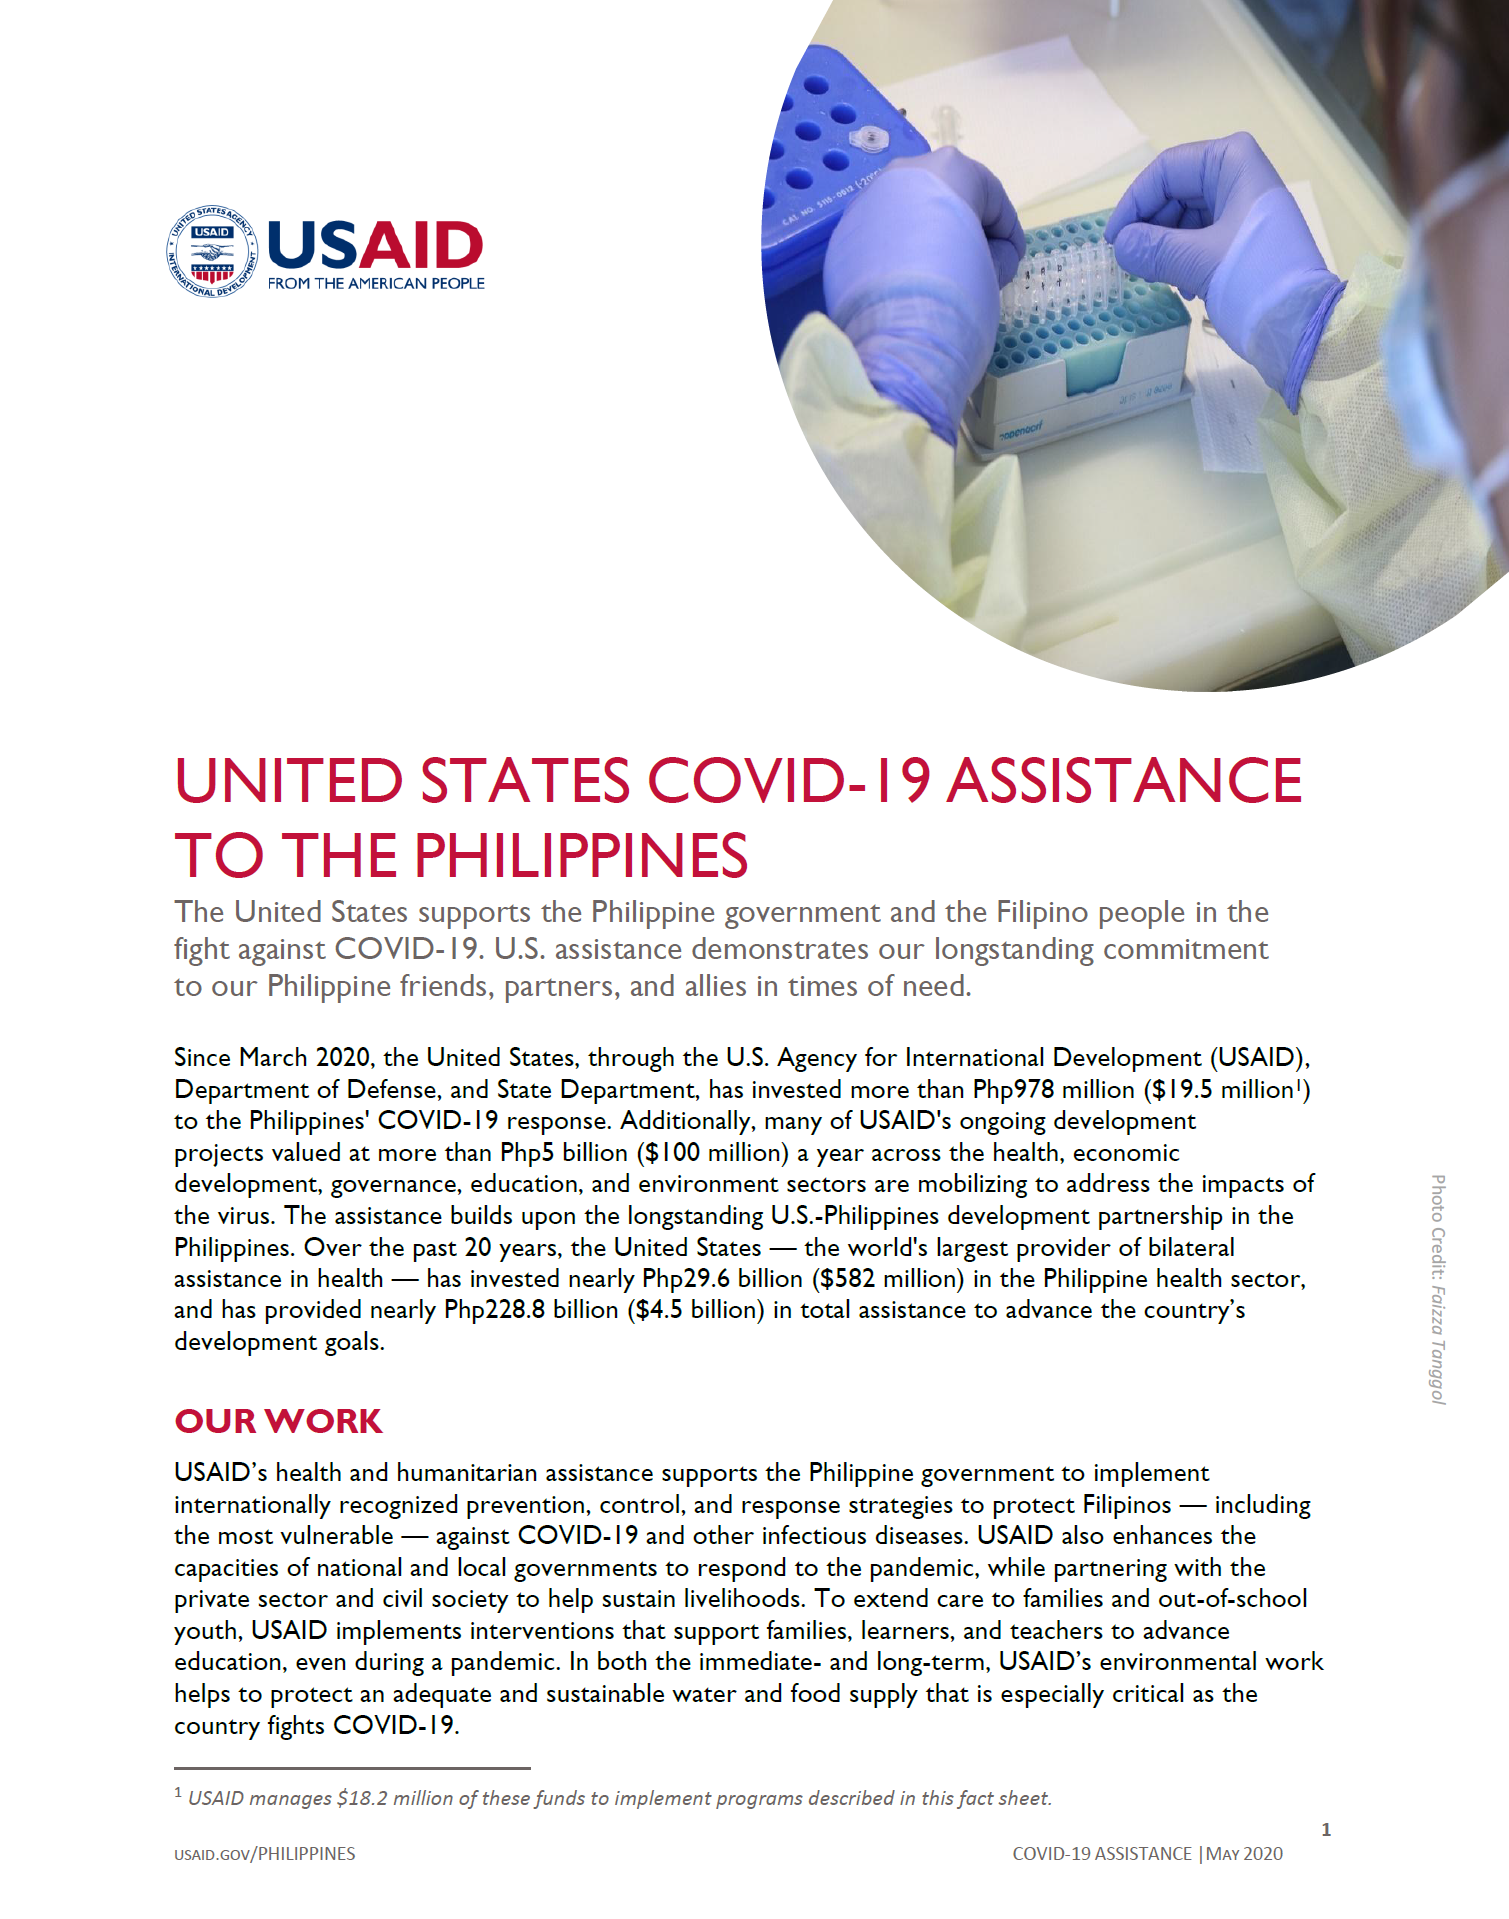 United States COVID-19 Assistance to the Philippines